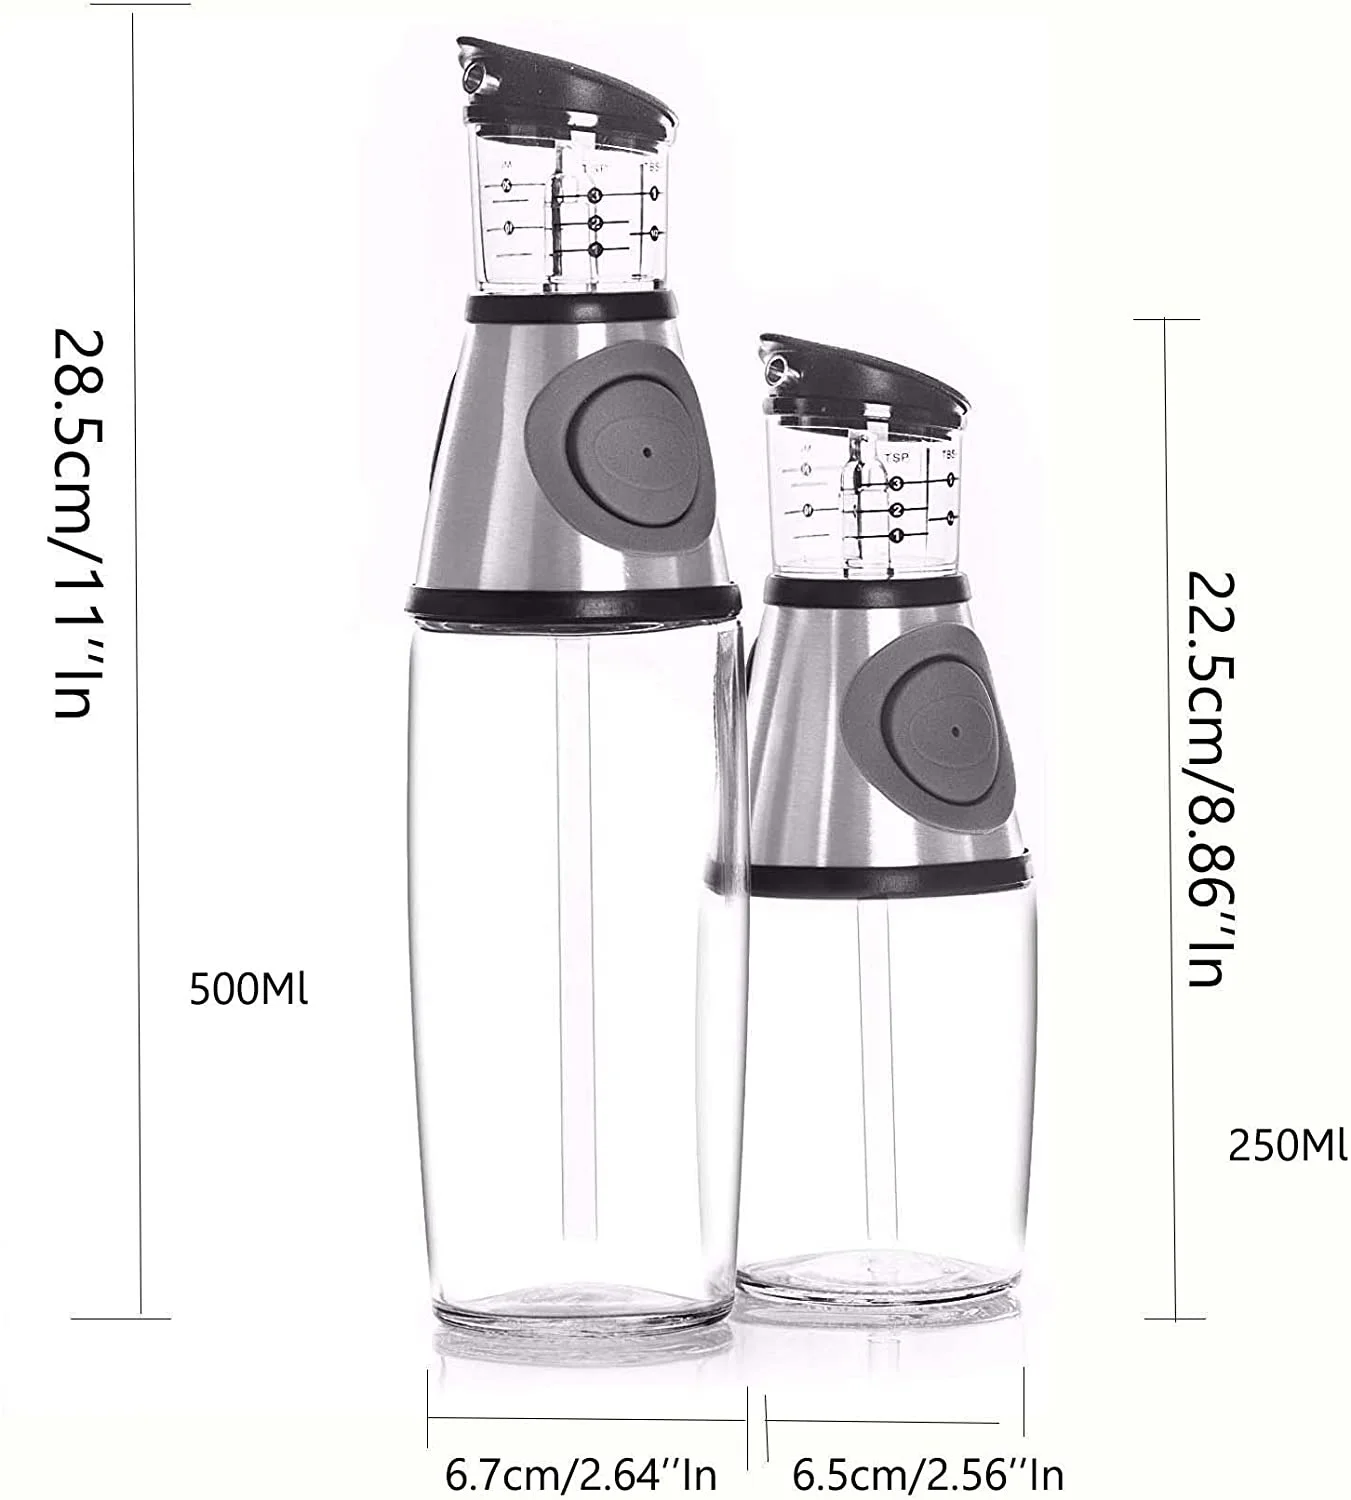 Olive Oil Dispenser Bottle For Kitchen, Oil and Vinegar Cruet Dispenser with Measurements and Drip Free Spout 500ml (1600154566828)